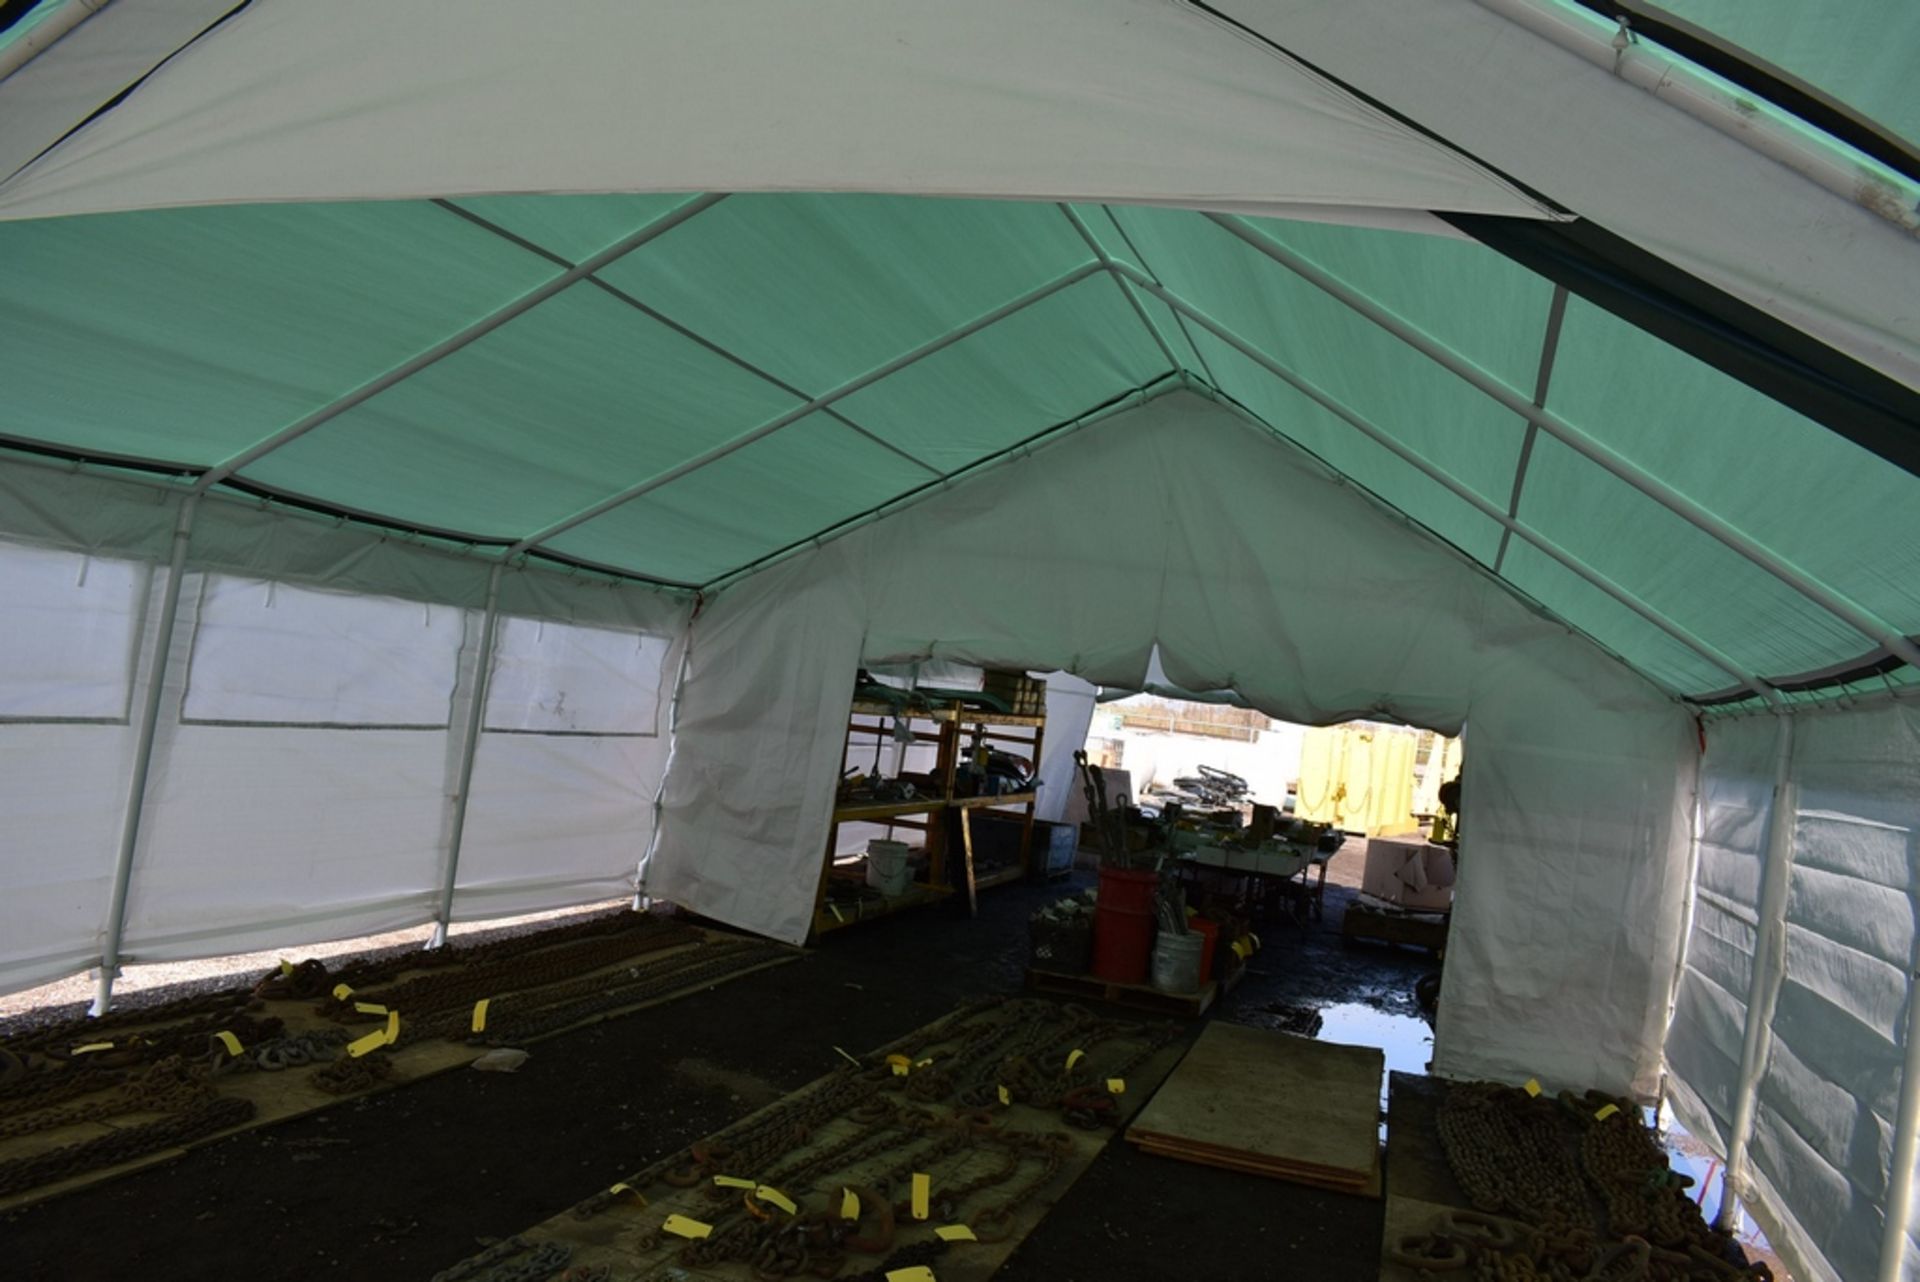 WEATHER FAST 20'X20'X12' EVENT TENTS W/FULL VALANCE FITTED COVER, 8 FOOT PLATES, 2" DIA. STEEL - Image 2 of 2